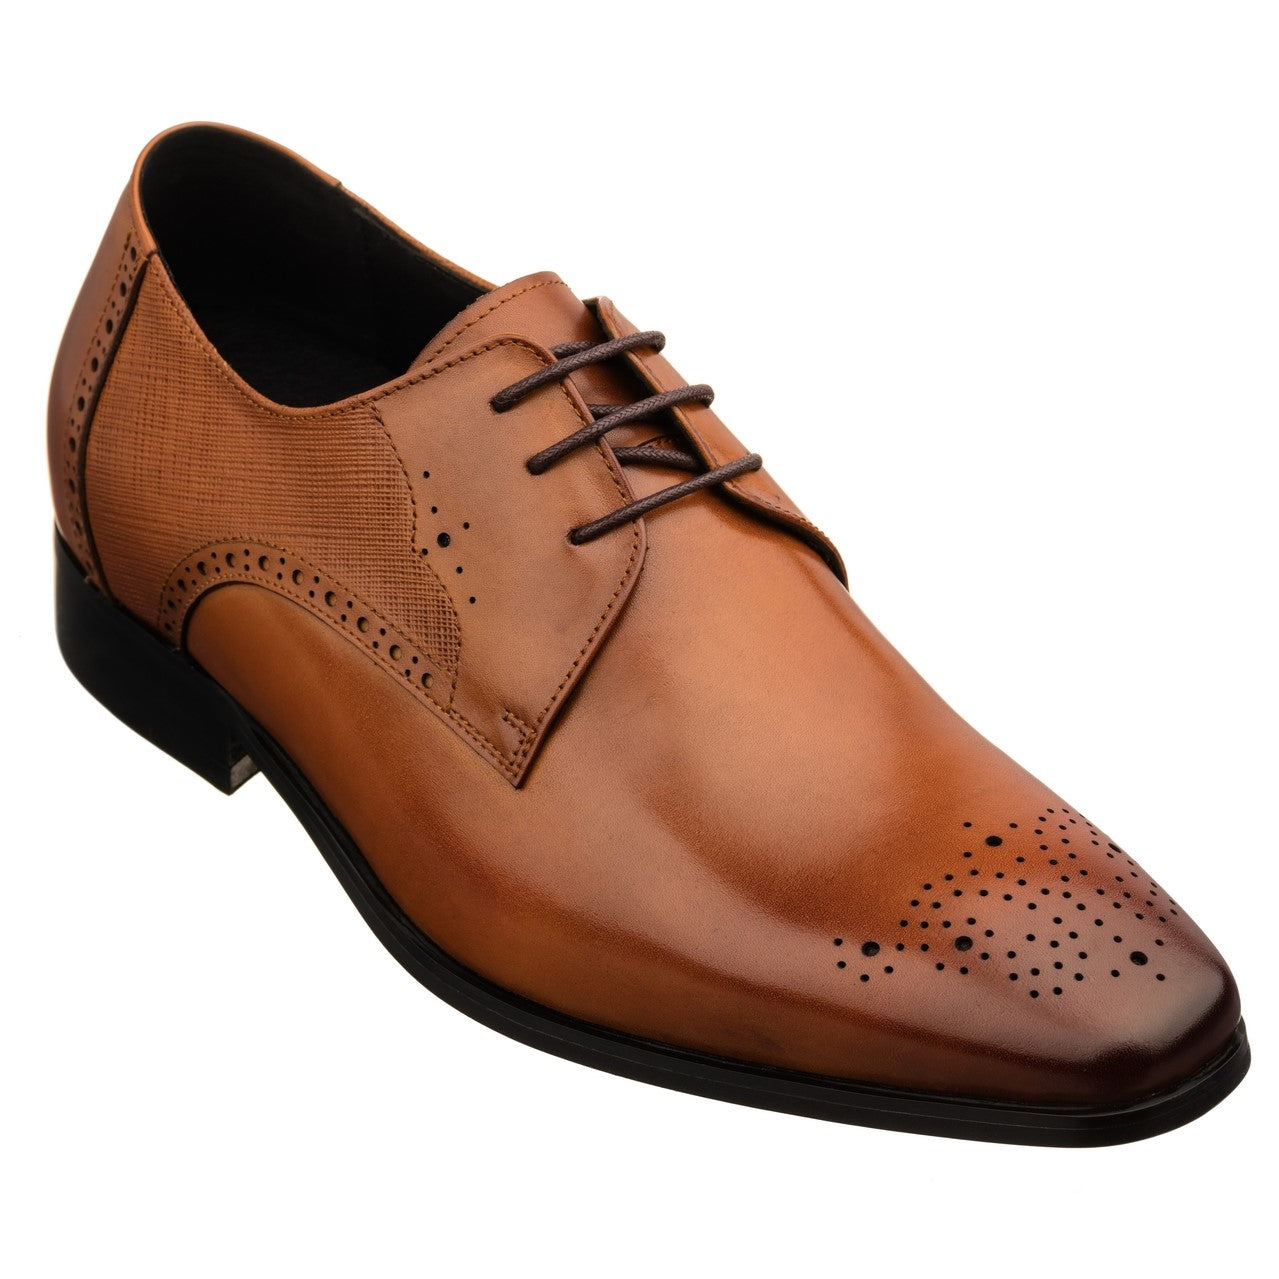 Elevator shoes height increase TOTO - Y6512 - 2.2 Inches Taller (Brown) - Dress Oxford - Lightweight